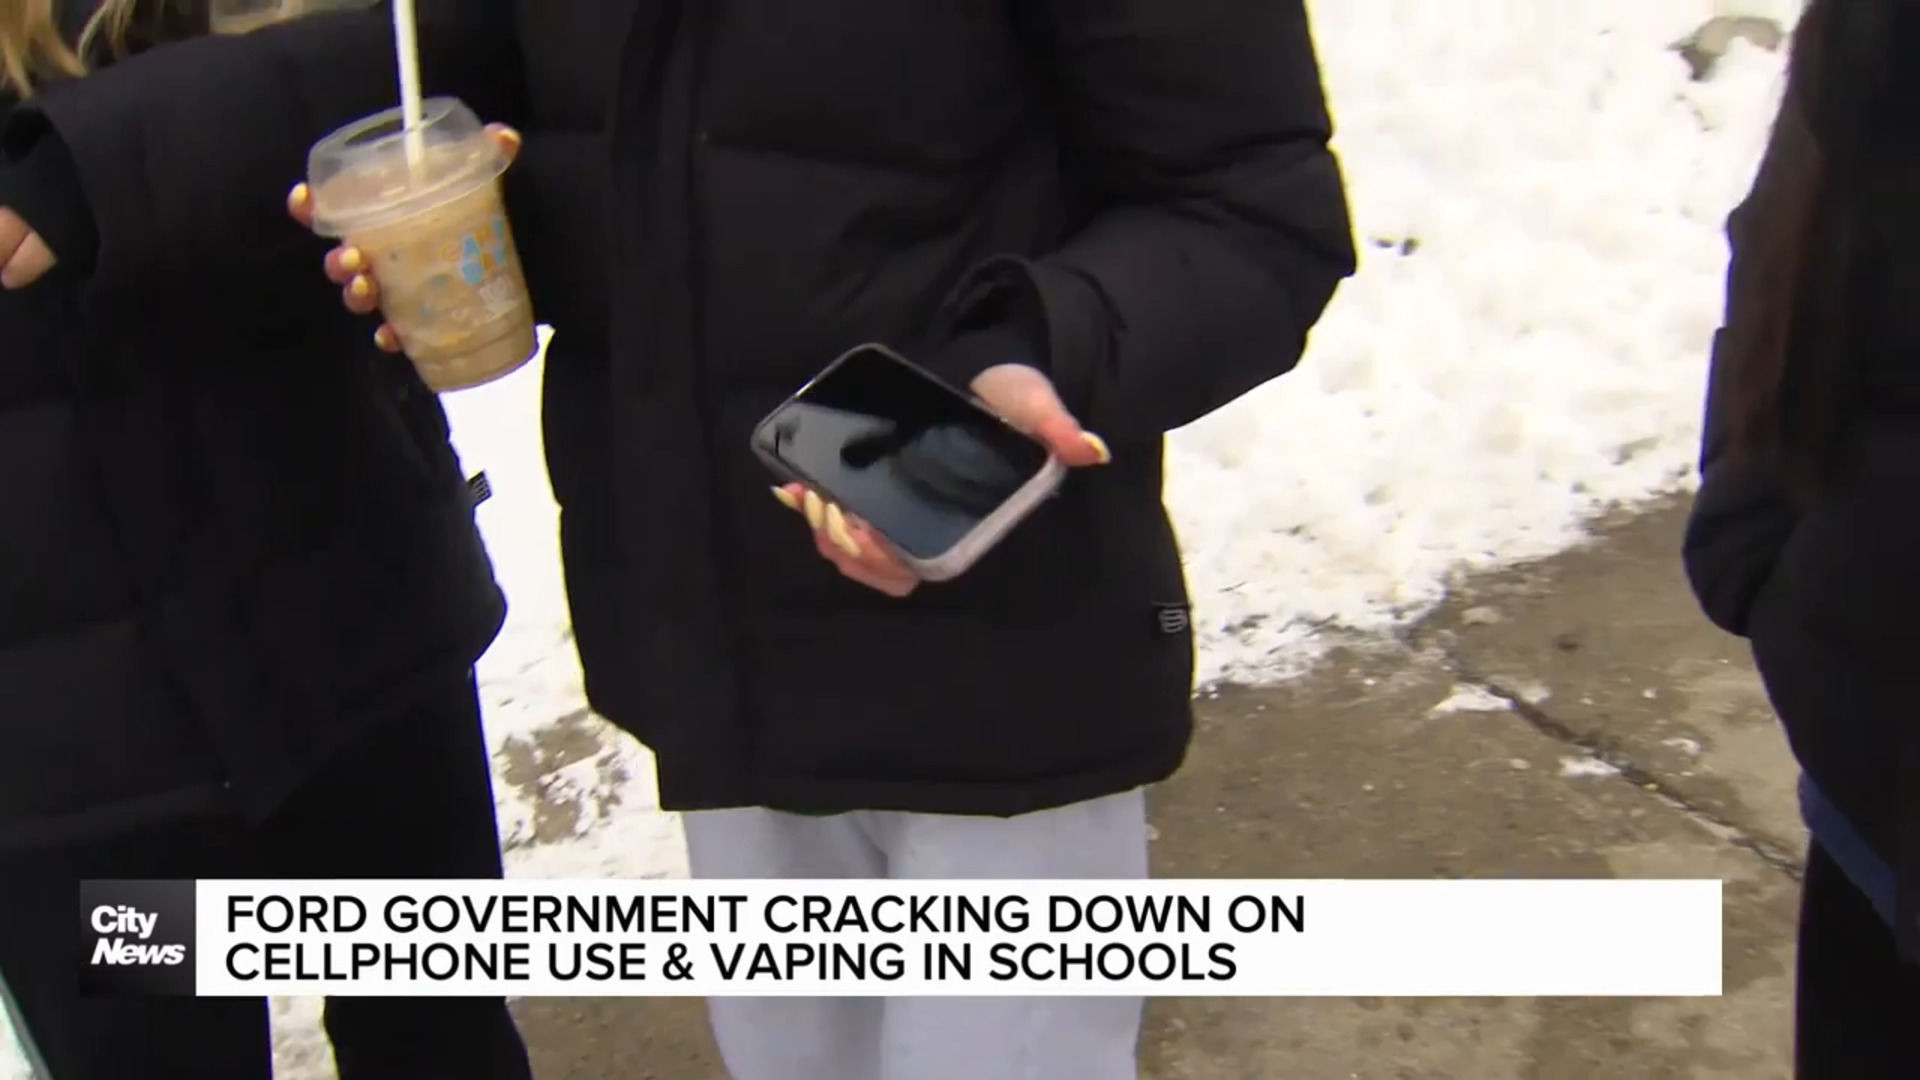 Ford government cracks down on cell phone use, vaping in schools